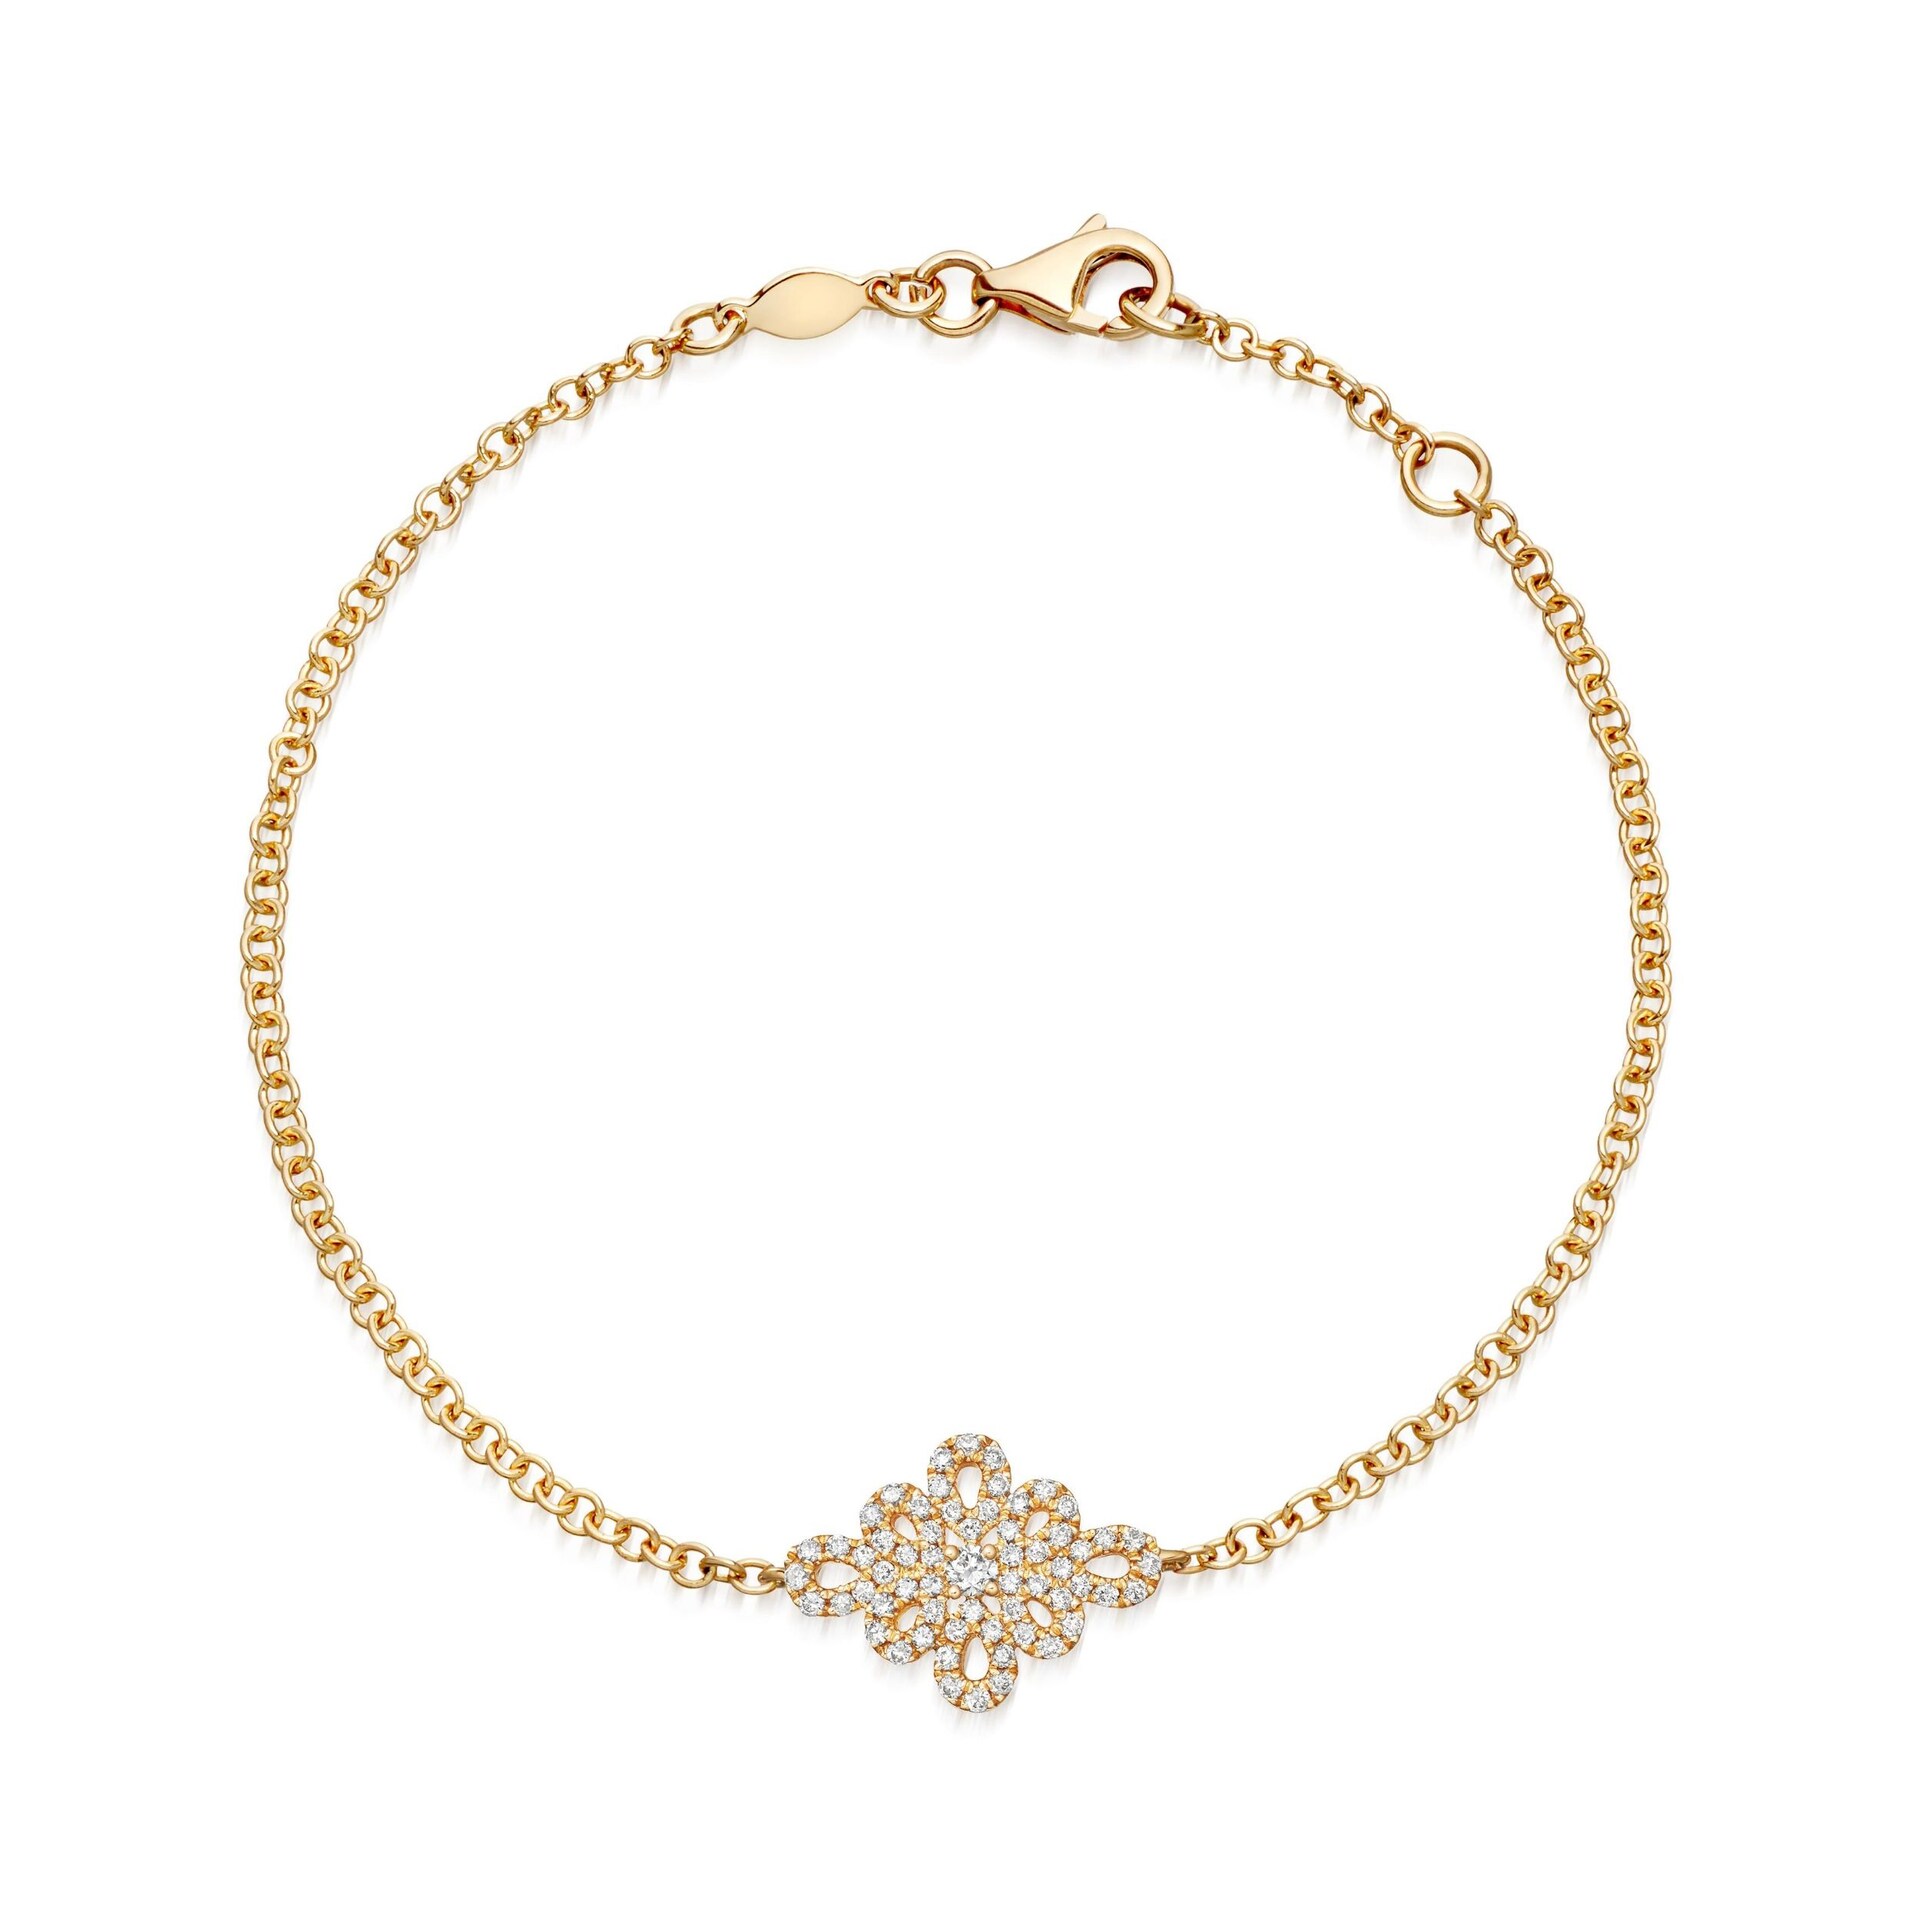 Lace 18ct Yellow Gold and 0.25ct Diamond Filigree Detail Bracelet